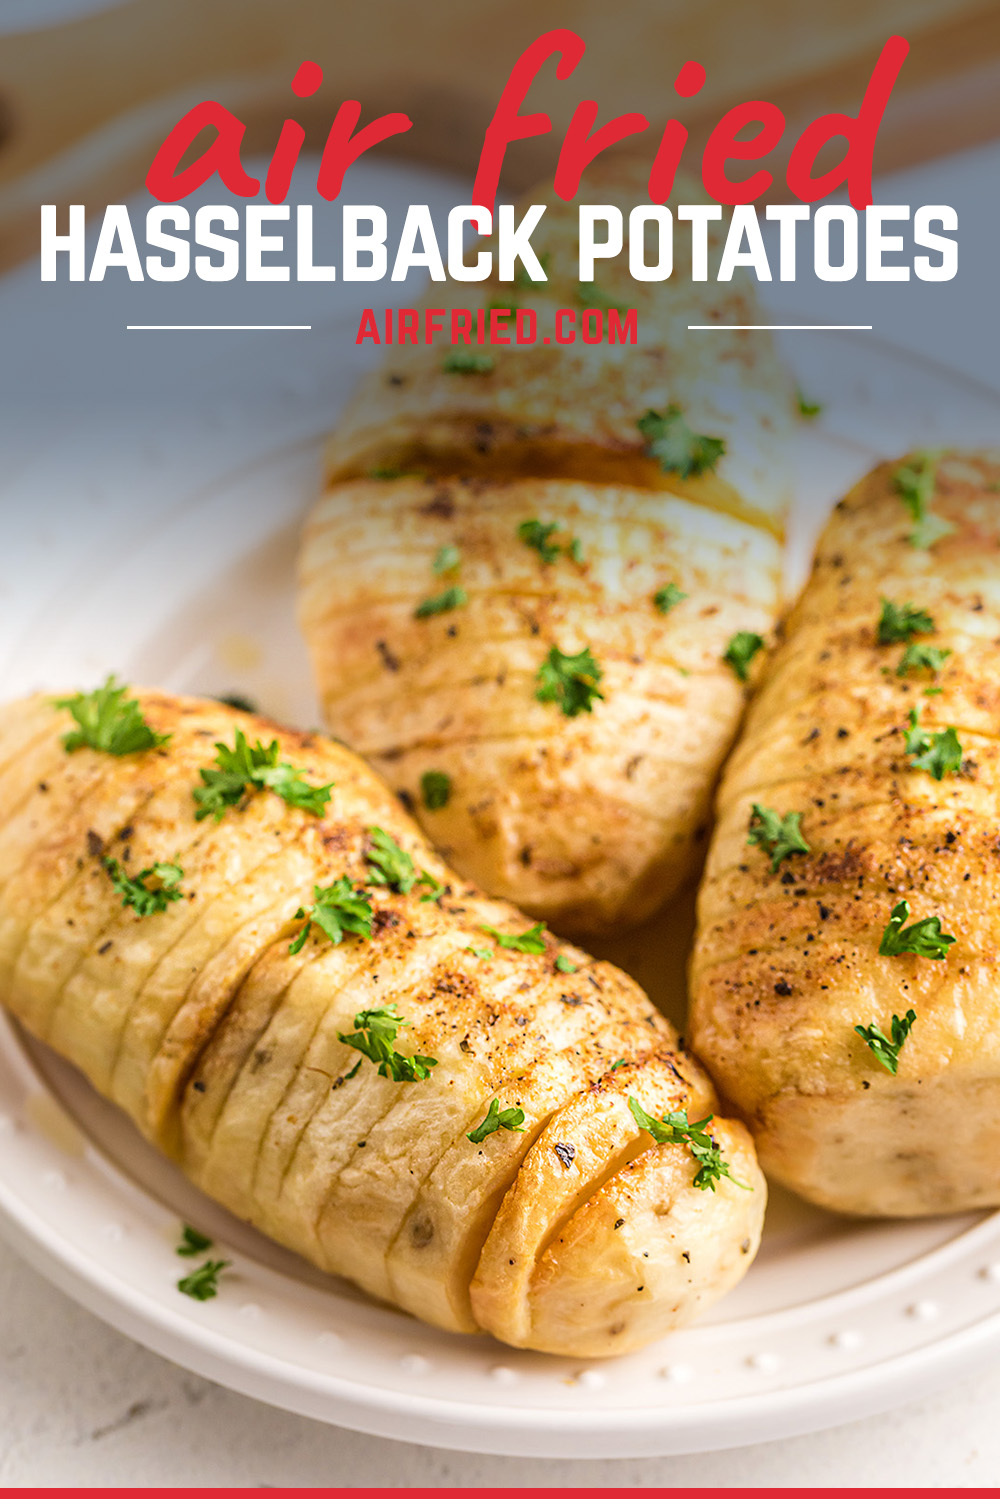 One of the best ways to eat a potato! Air fryer hasselback potatoes - ready so quickly and super easy! #Hasselback #potatoes #airfryer